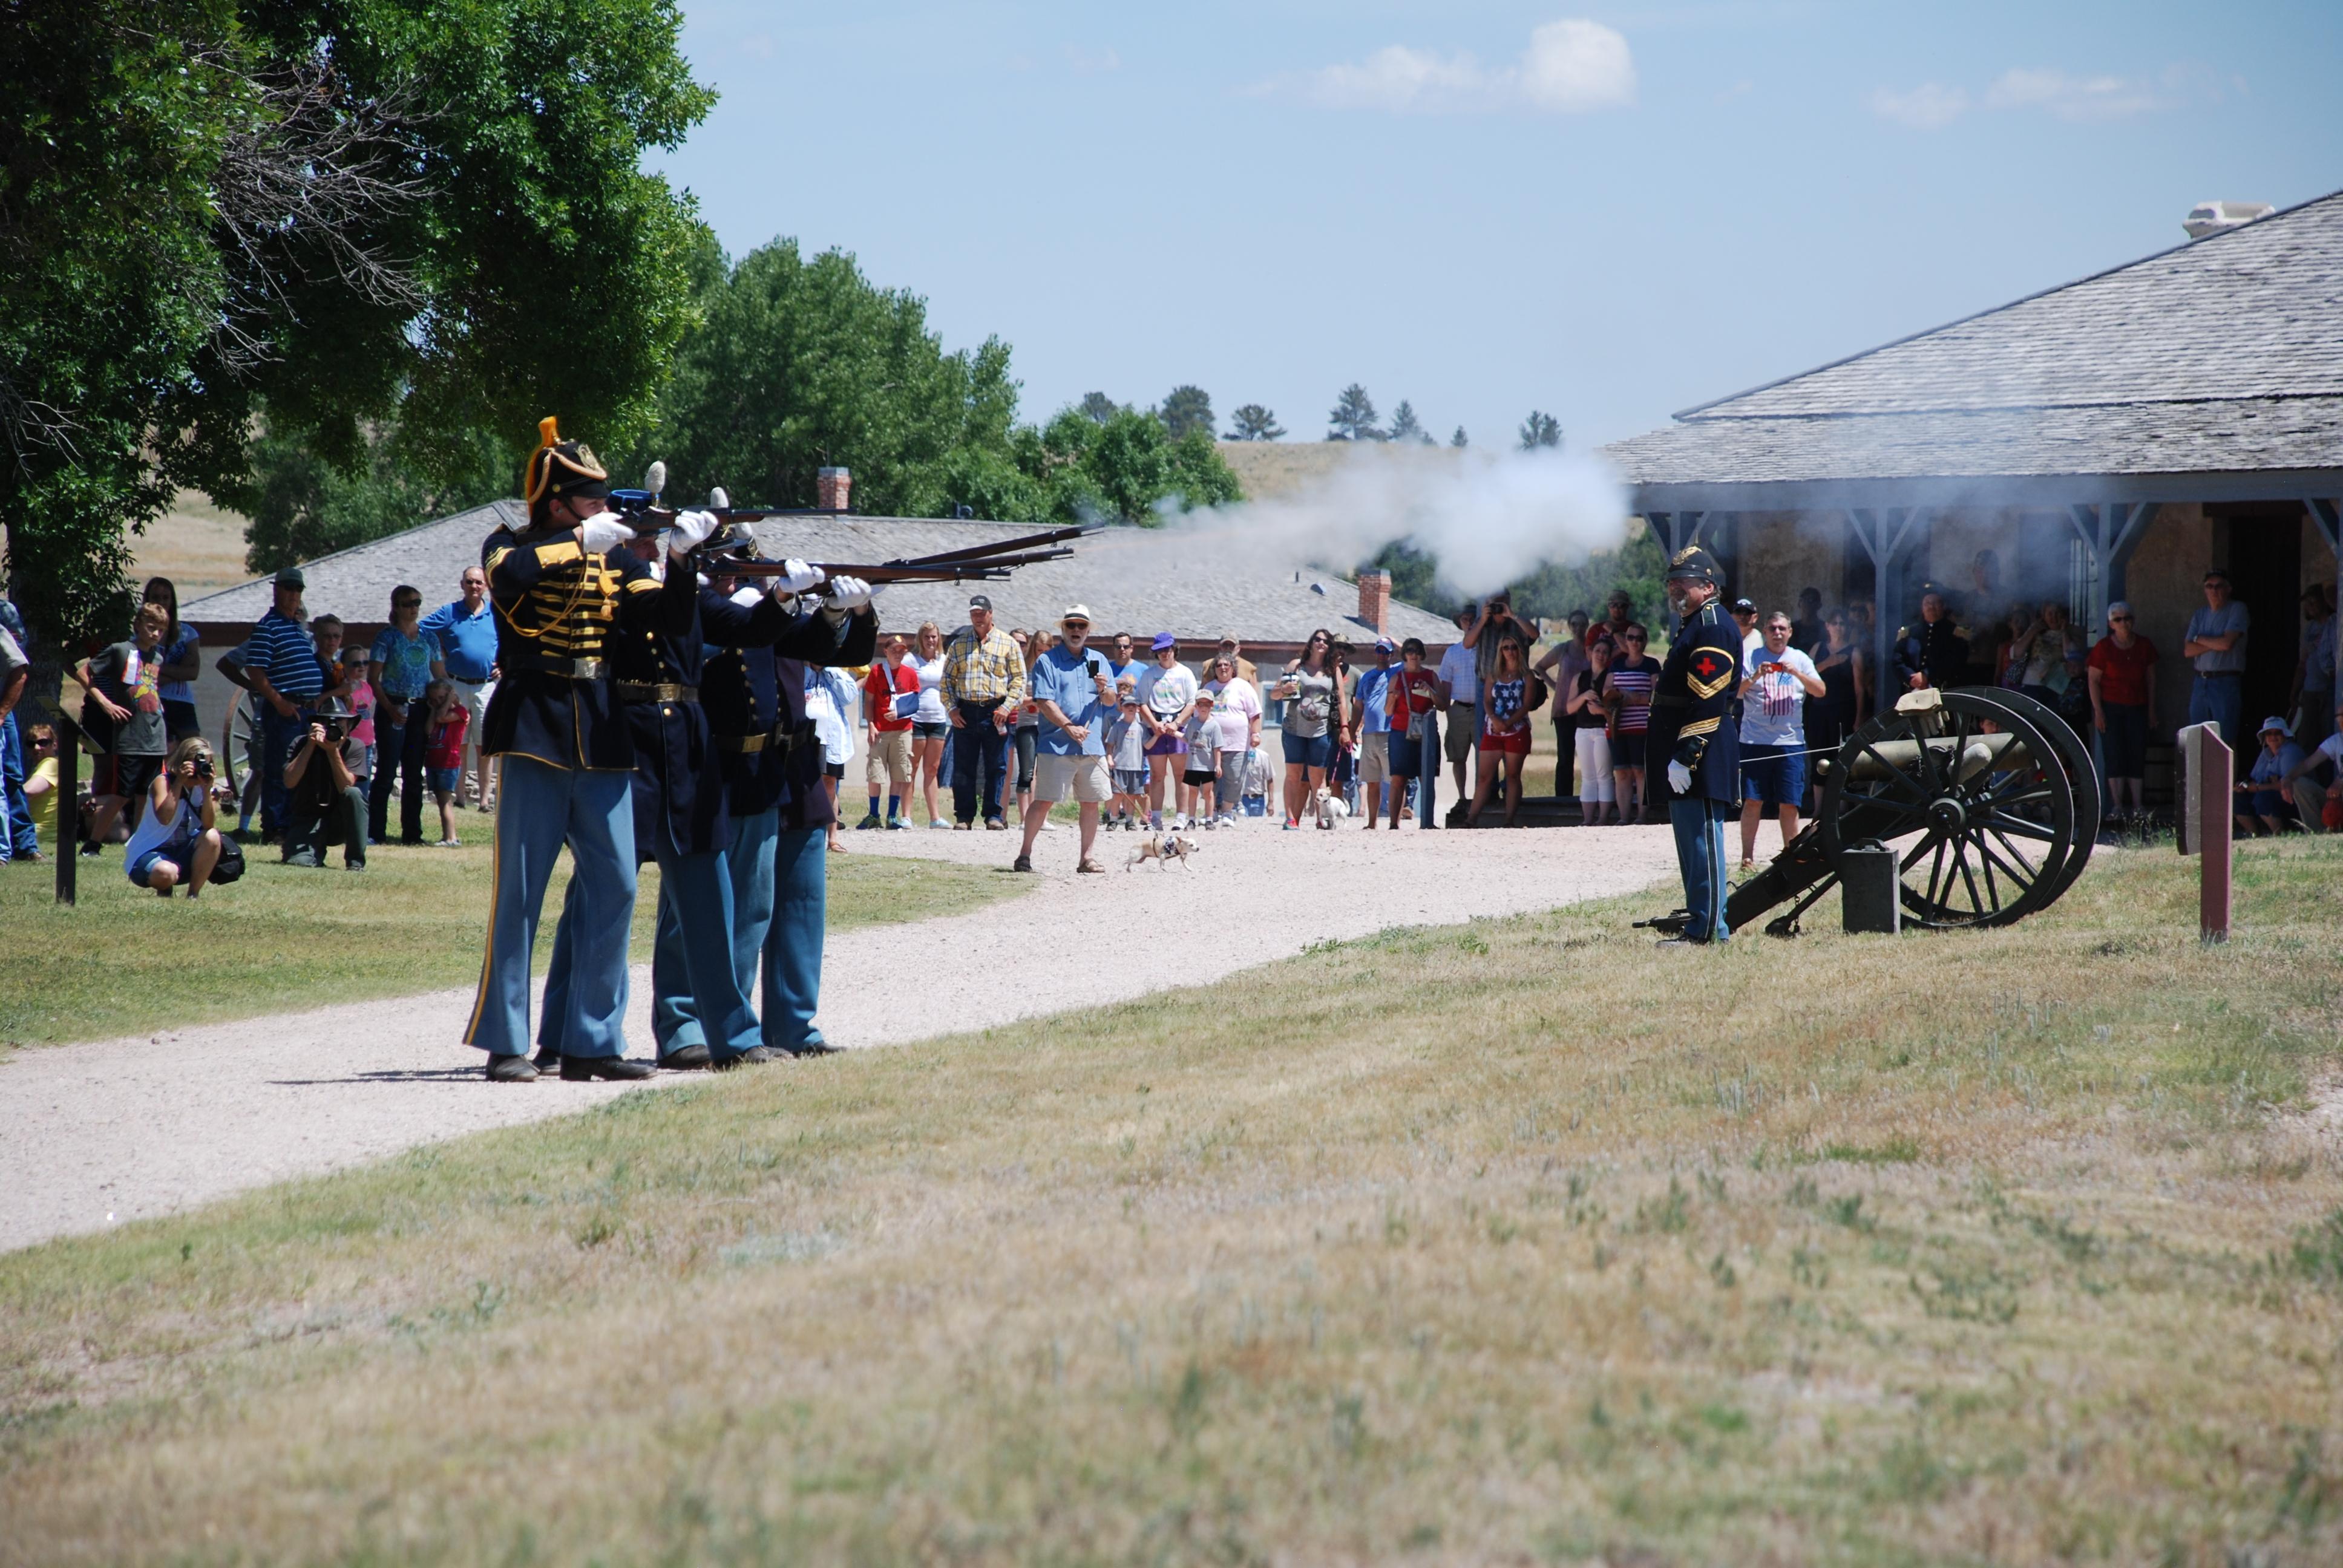 Rangers in living history clothing fire a salute with Springfield rifles for Independence Day.